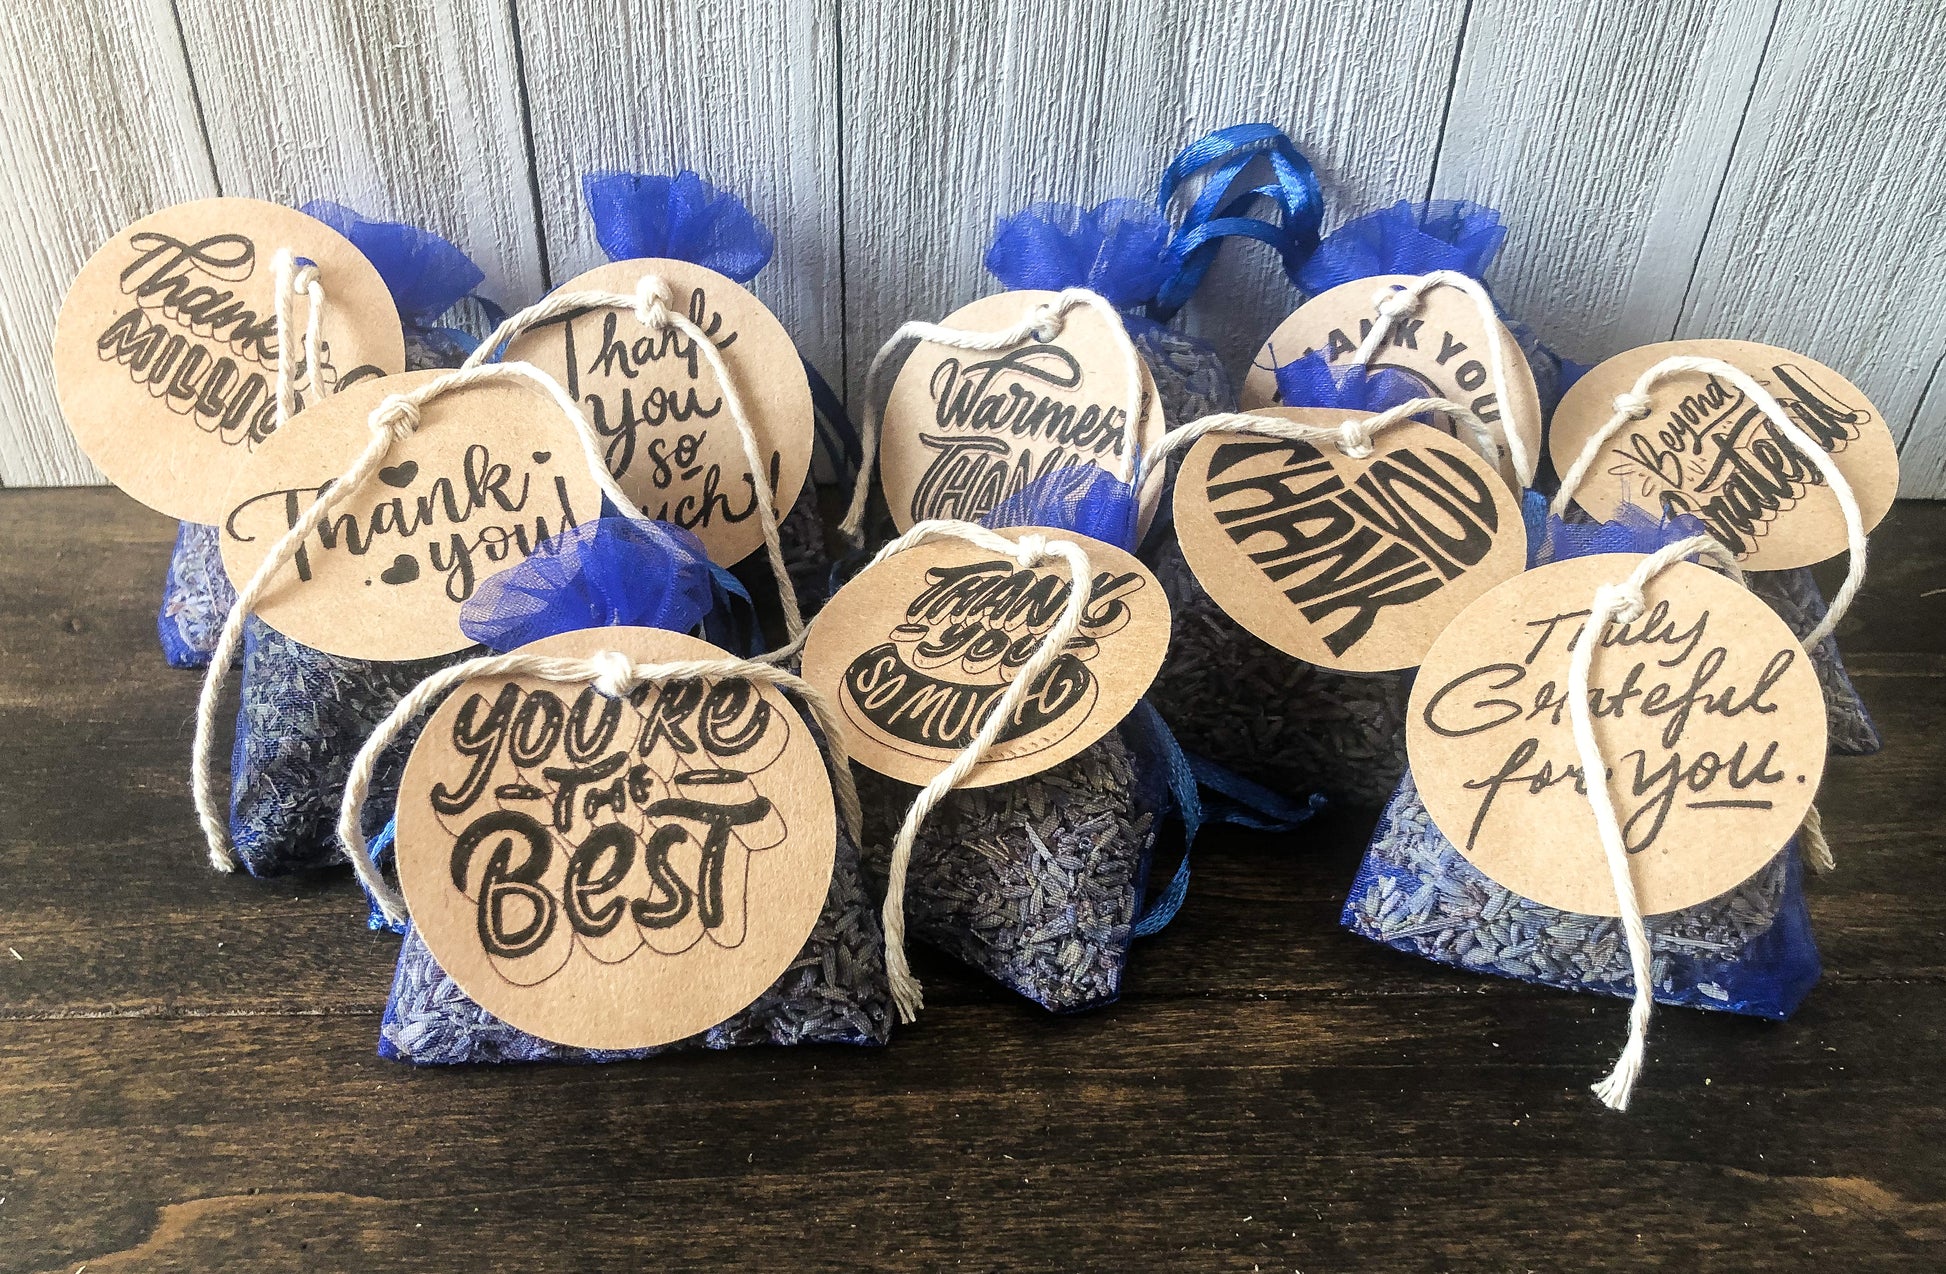 bulk potpourri sachets for party favors/appreciation gifts on wooden background